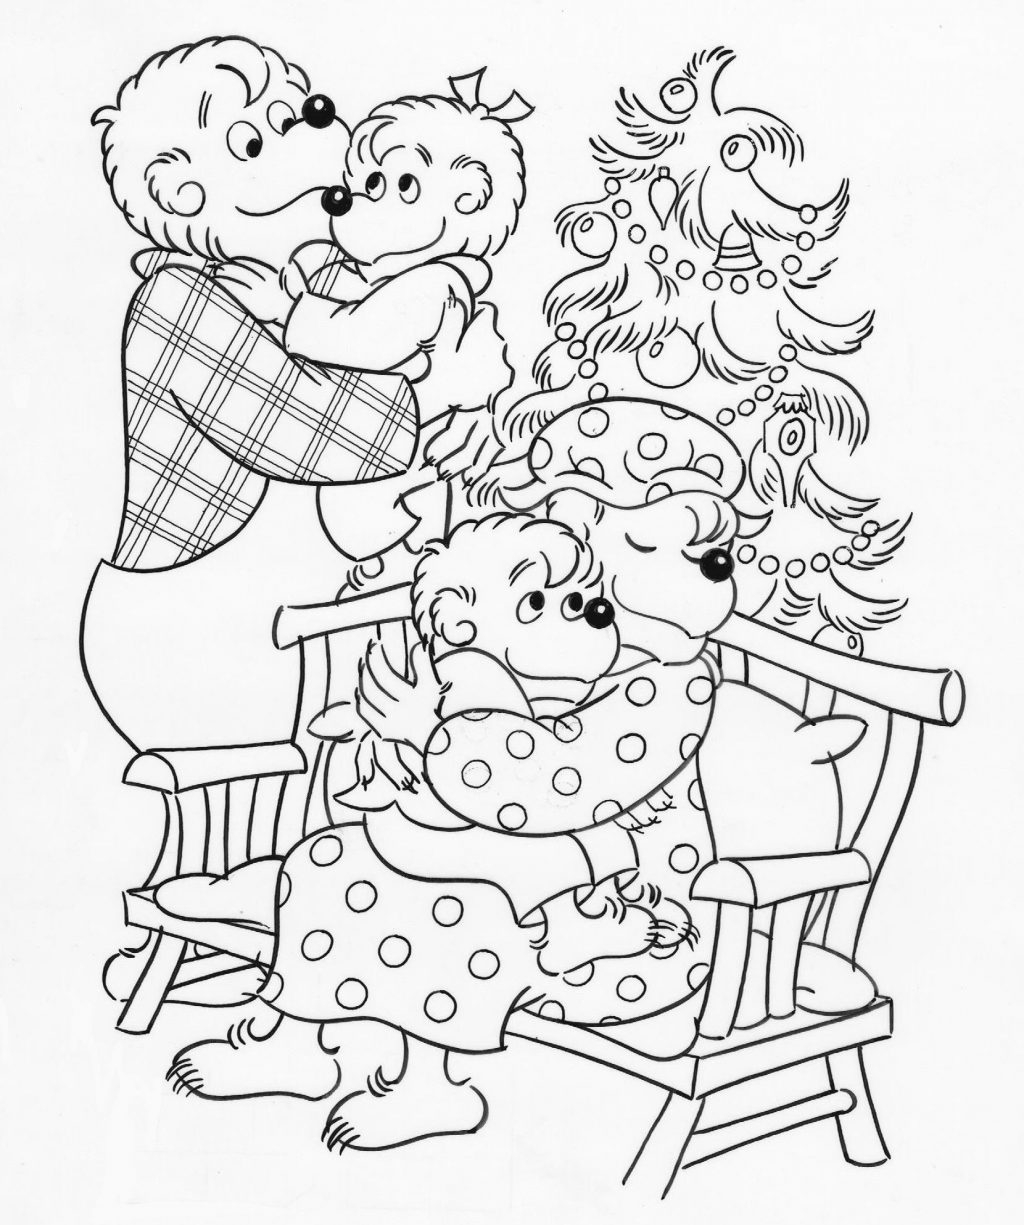 Bears Coloring Pages Coloring Page Berenstain Bears Coloring Pages Awesome Ideas